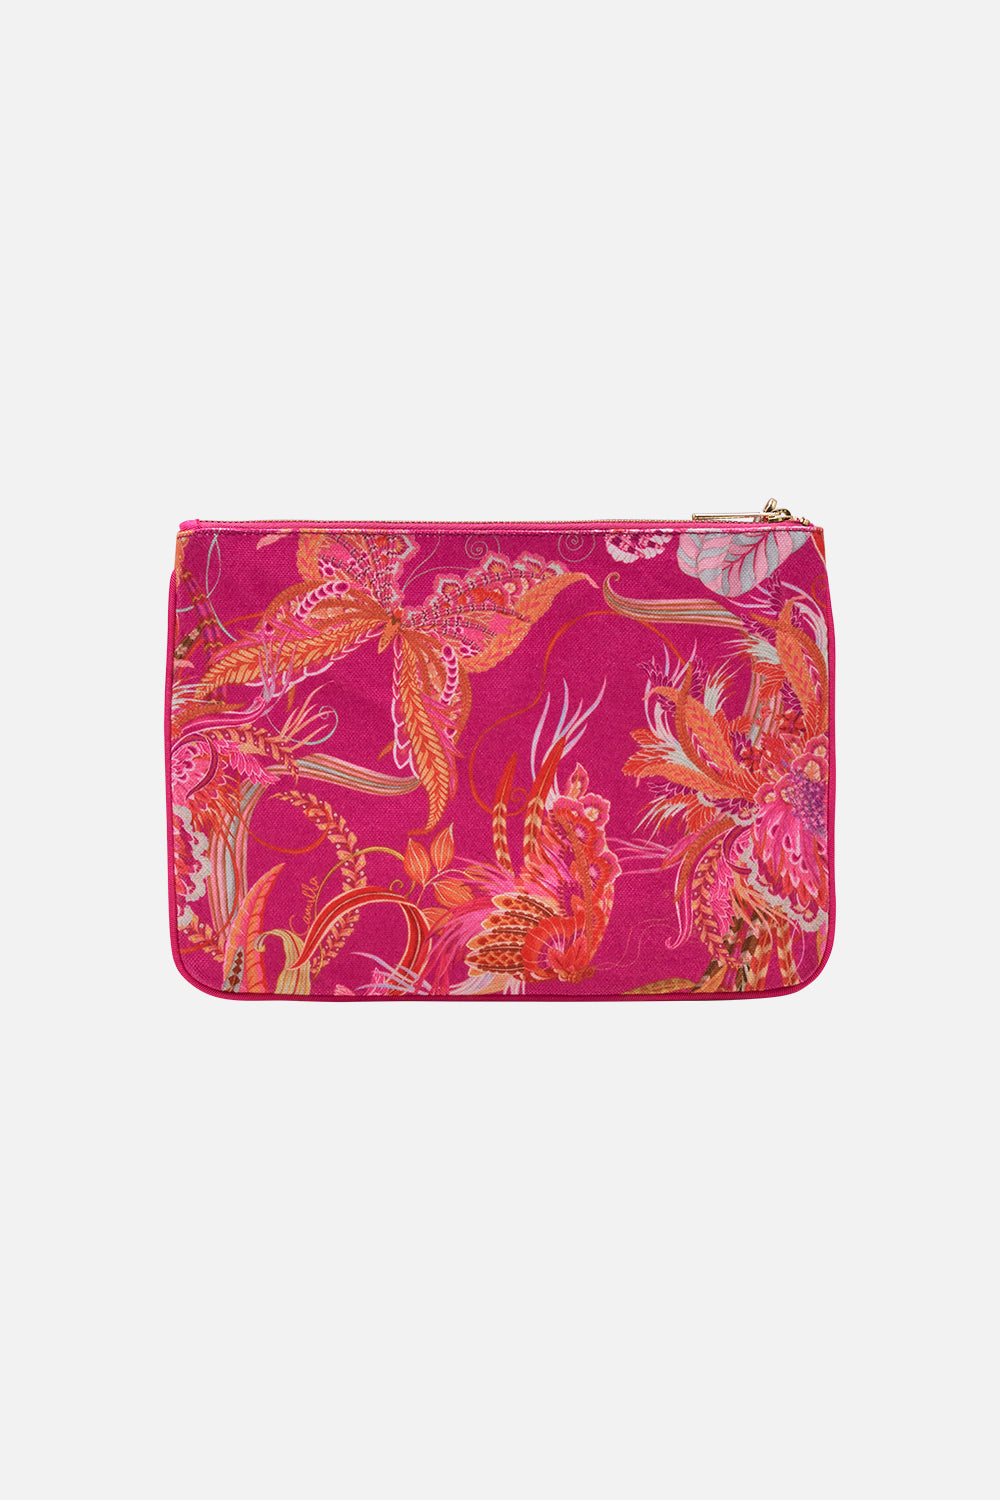 CAMILLA pink clutch bag in A Heart That Flutters 